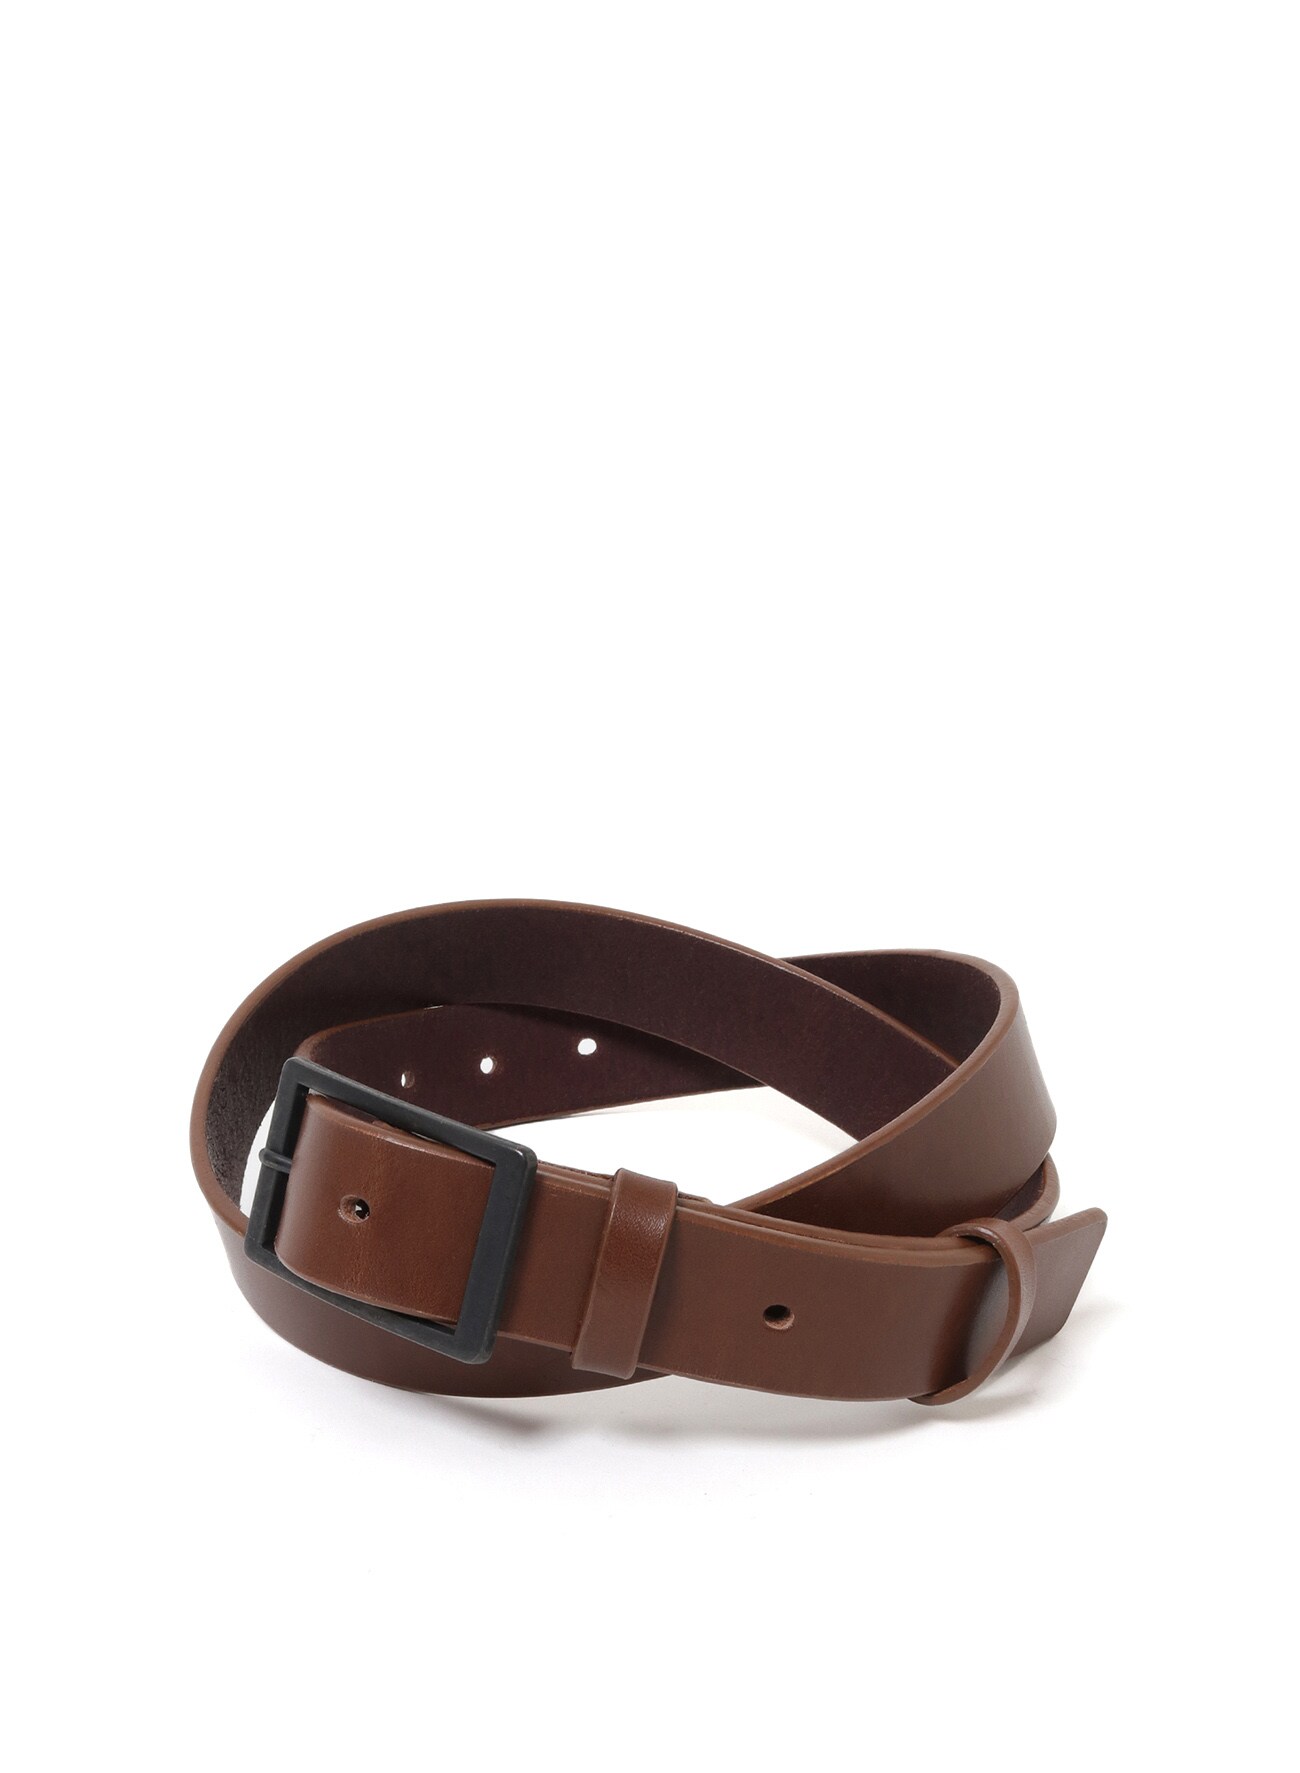 THICK OIL 30mm LONG BELT(FREE SIZE Brown): Y's｜THE SHOP 